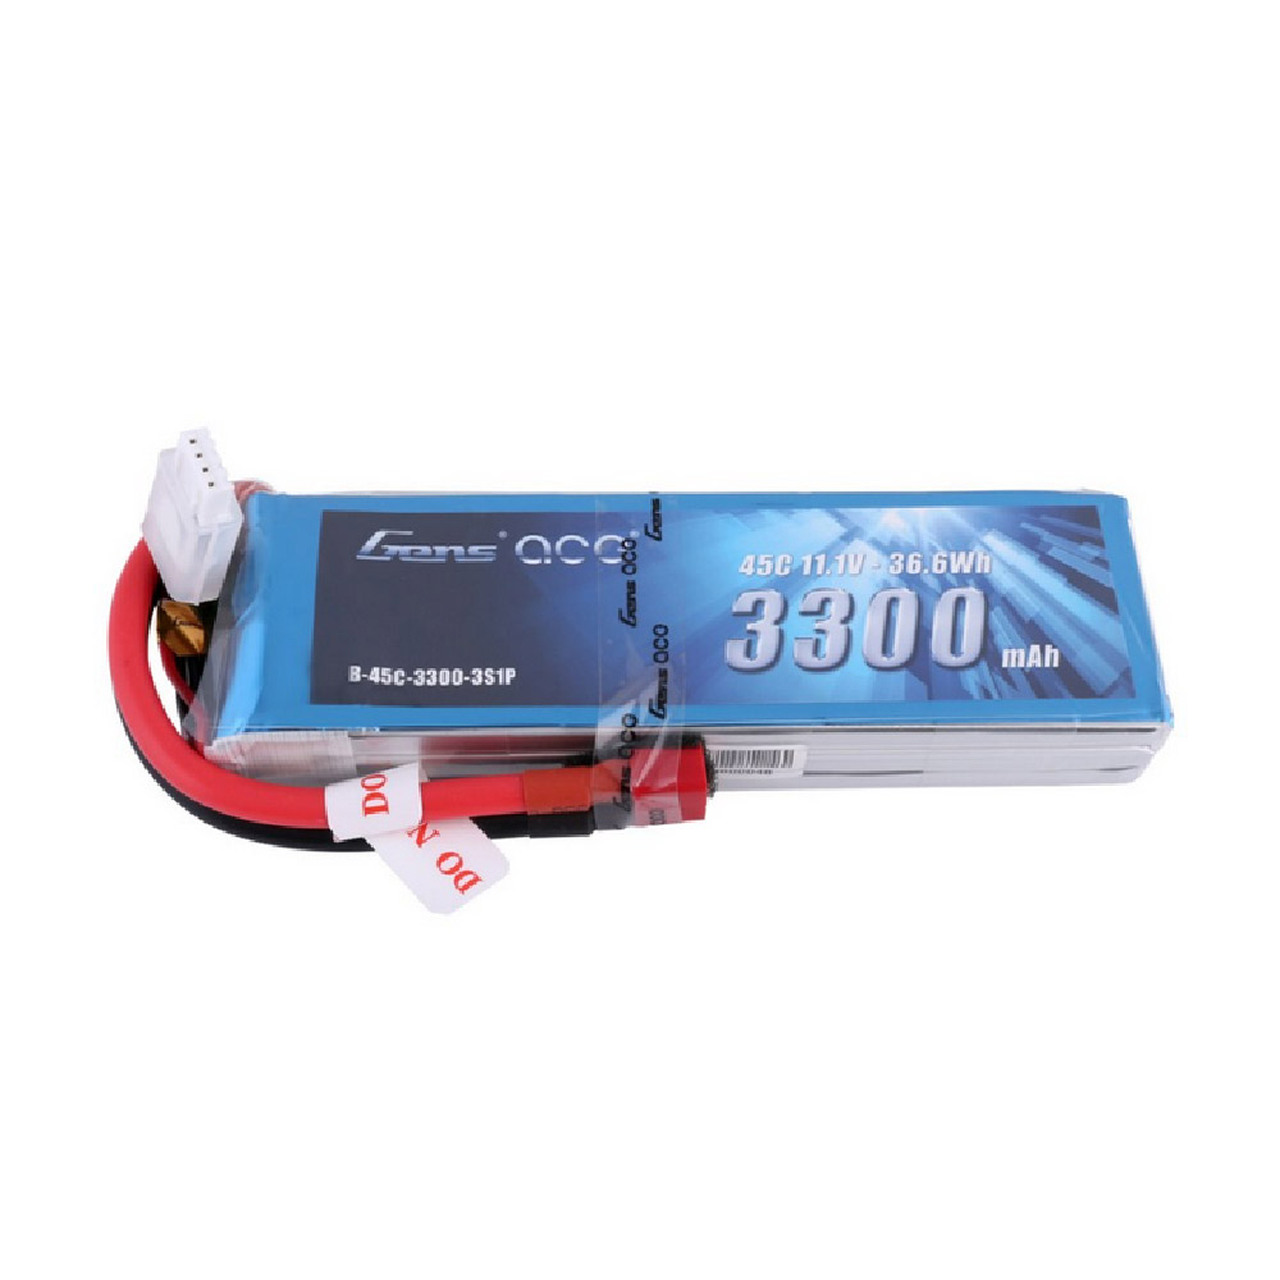 Gens ace 3300mAh 11.1V 45C 3S1P Lipo Battery Pack with Deans Plug